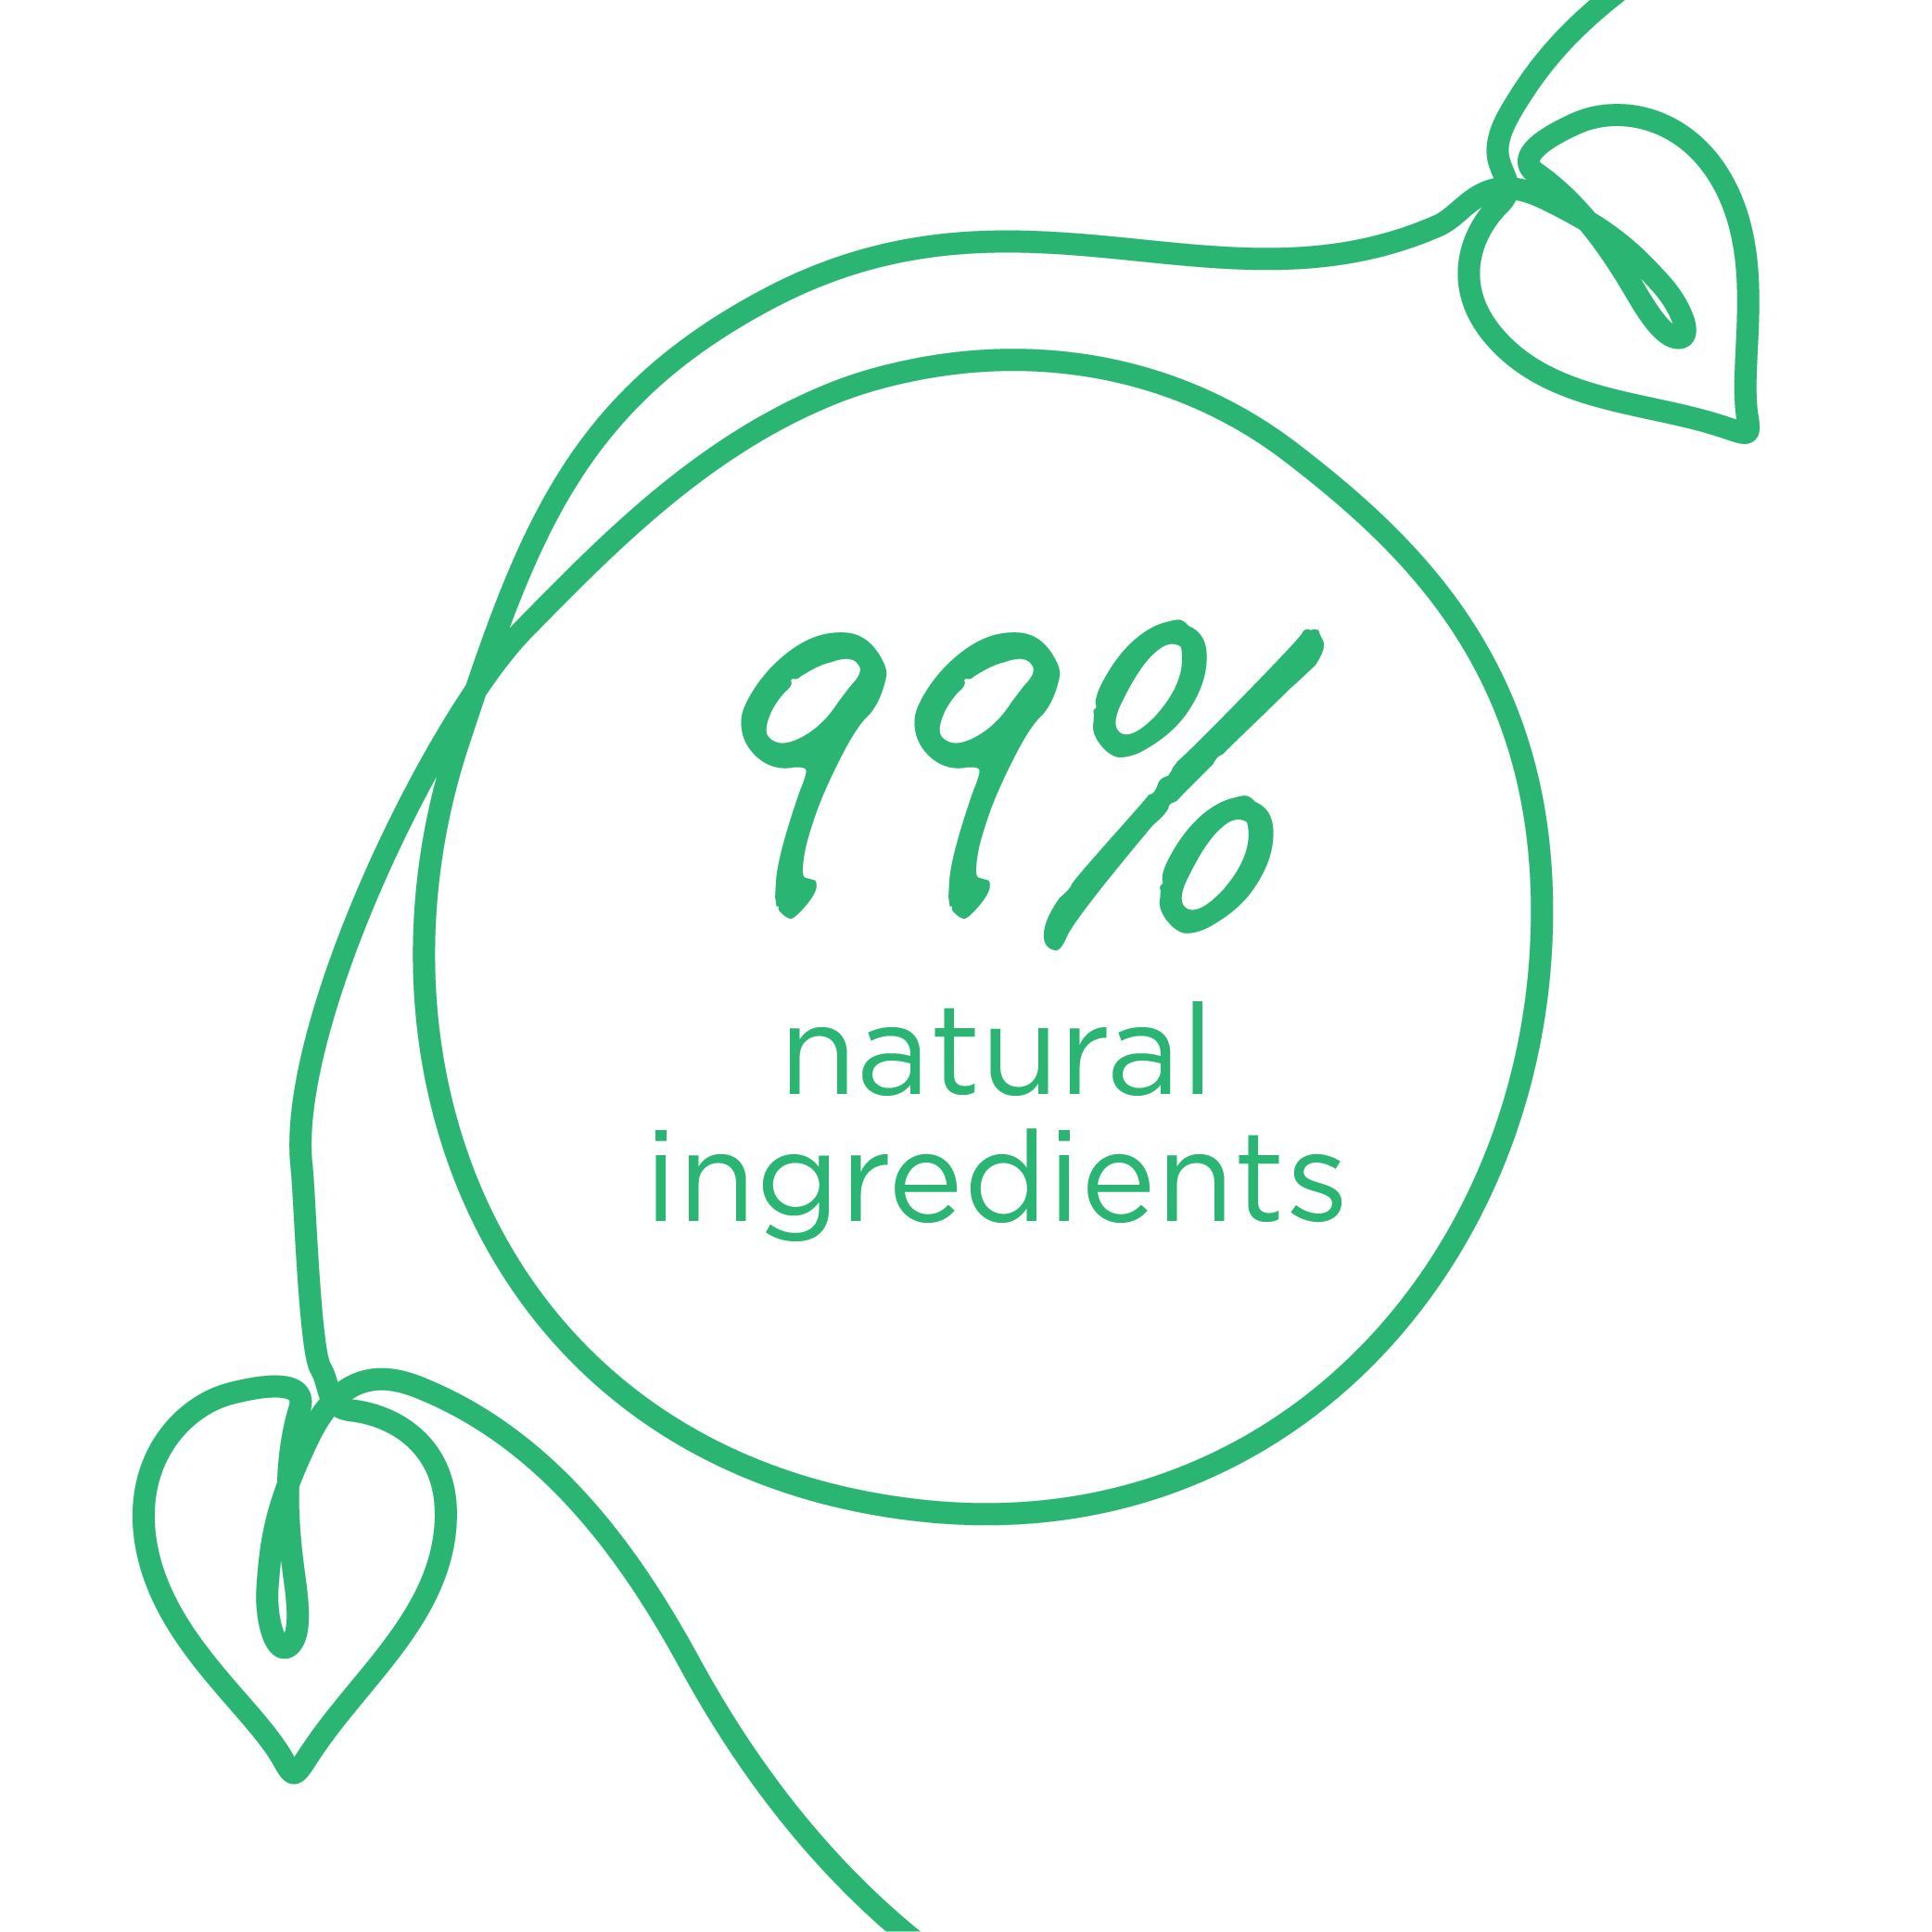 Info-99-percent-natural-ingredients.png